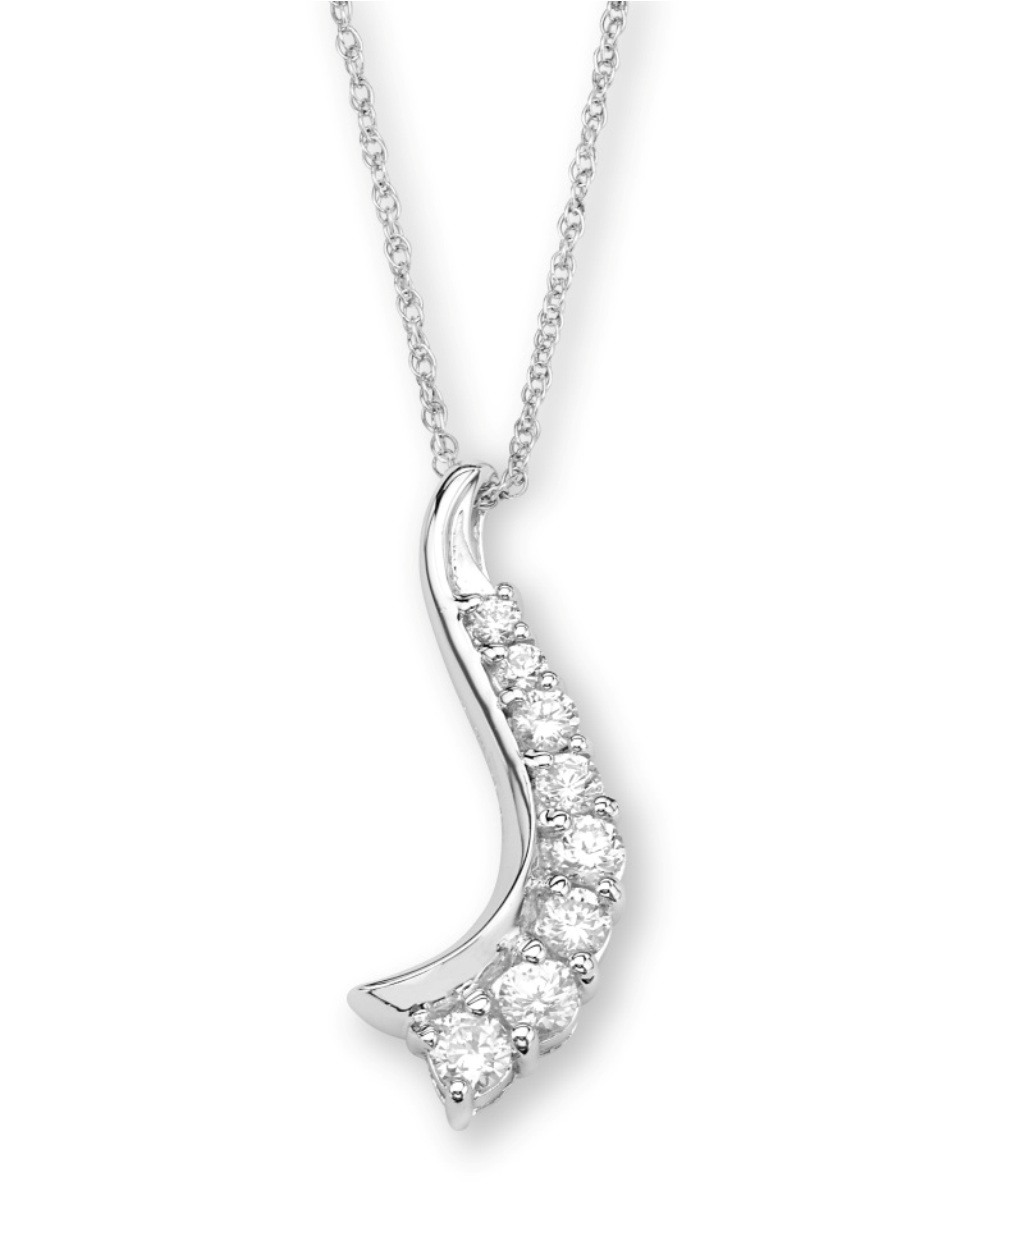 Graduated CZ Swirl Pendant Necklace, Rhodium Plated Sterling Silver, 18